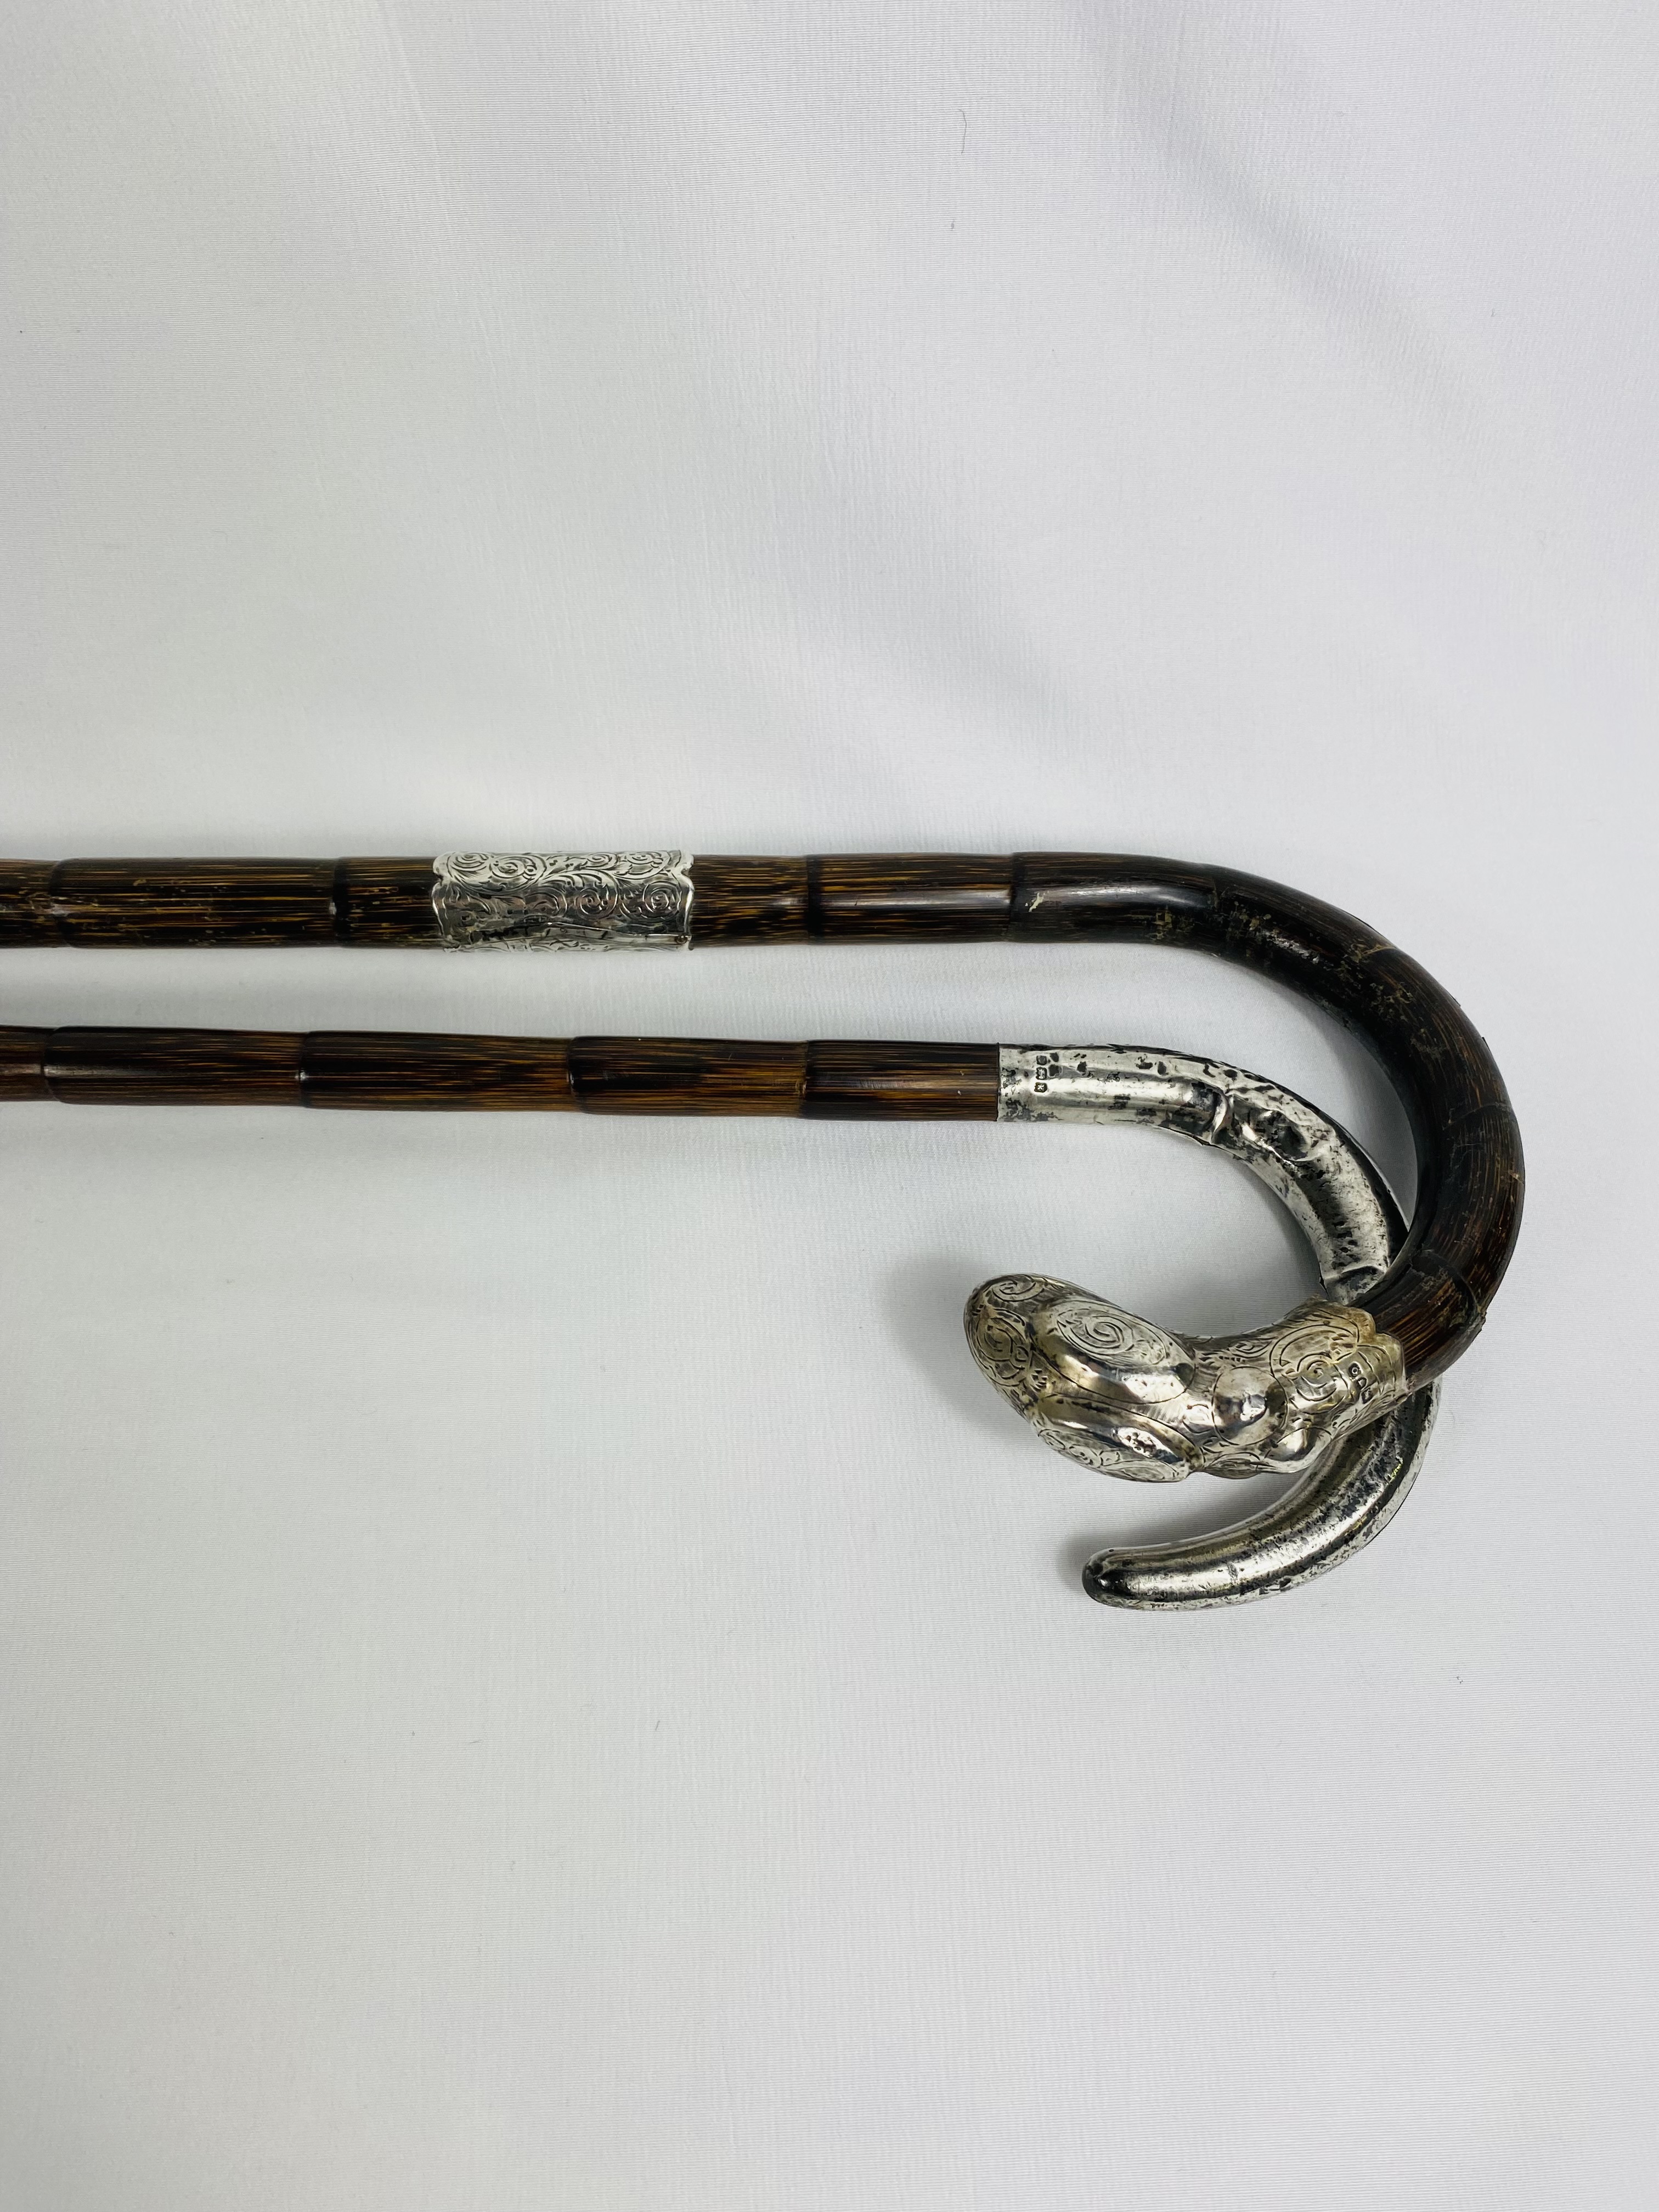 Walking cane with silver handle; walking cane with silver tip and ferrule - Image 2 of 4